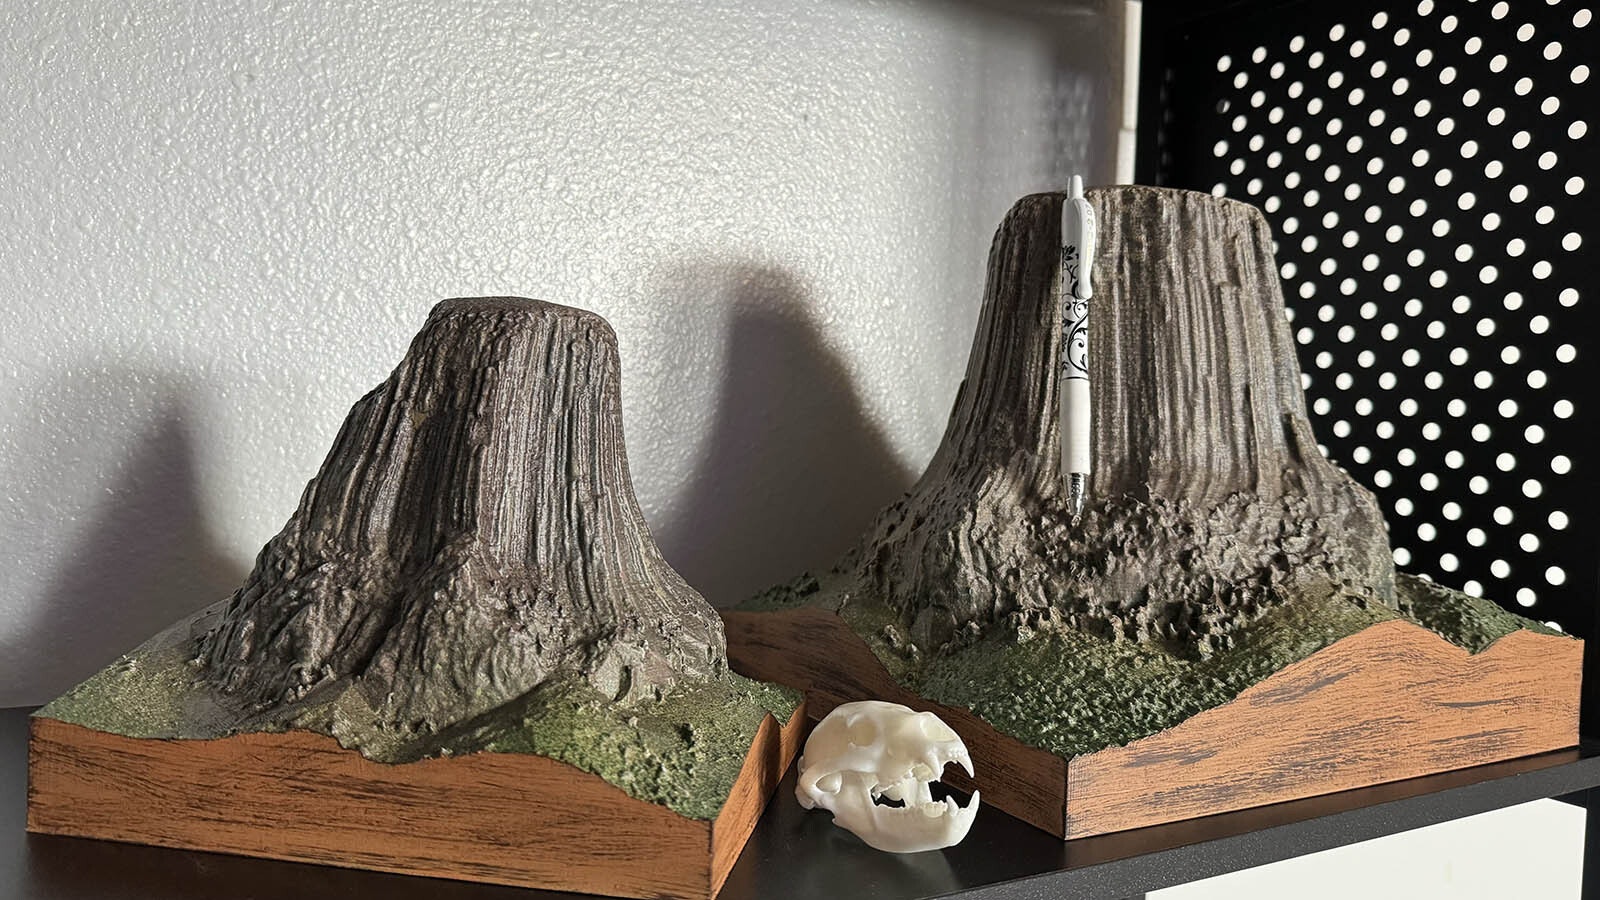 Two 3D printed models of Devils Tower, with a pen for scale. The models themselves are solid plastic with hollow interiors and took between 20 and 40 hours to print.